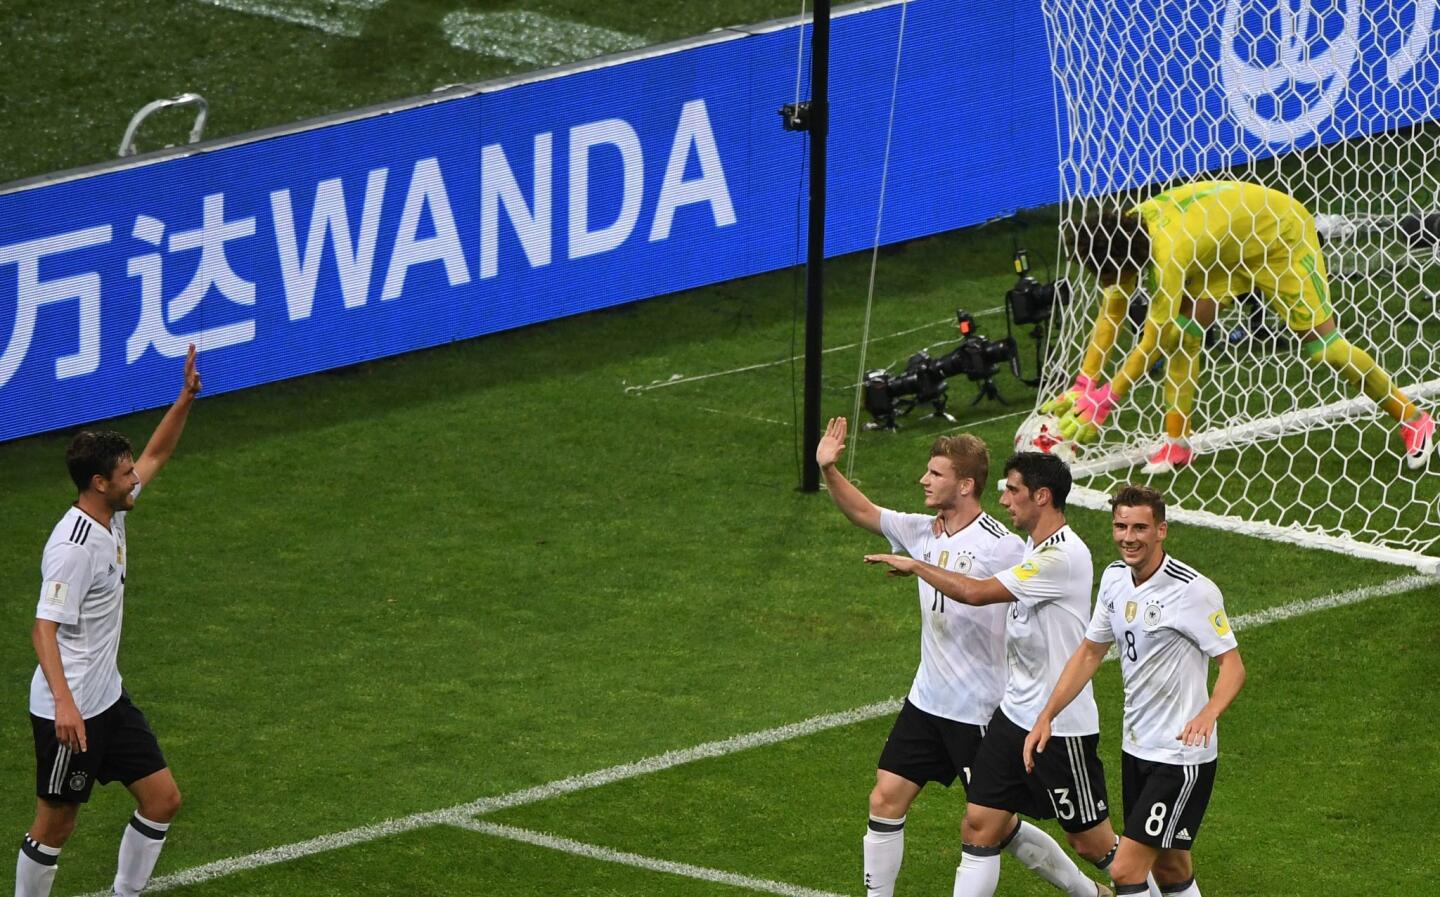 Germany's forward Timo Werner (2R) celebrate with team mates after scoring during the 2017 Confederations Cup semi-final football match between Germany and Mexico at the Fisht Stadium in Sochi on June 29, 2017. / AFP PHOTO / Patrik STOLLARZPATRIK STOLLARZ/AFP/Getty Images ** OUTS - ELSENT, FPG, CM - OUTS * NM, PH, VA if sourced by CT, LA or MoD **